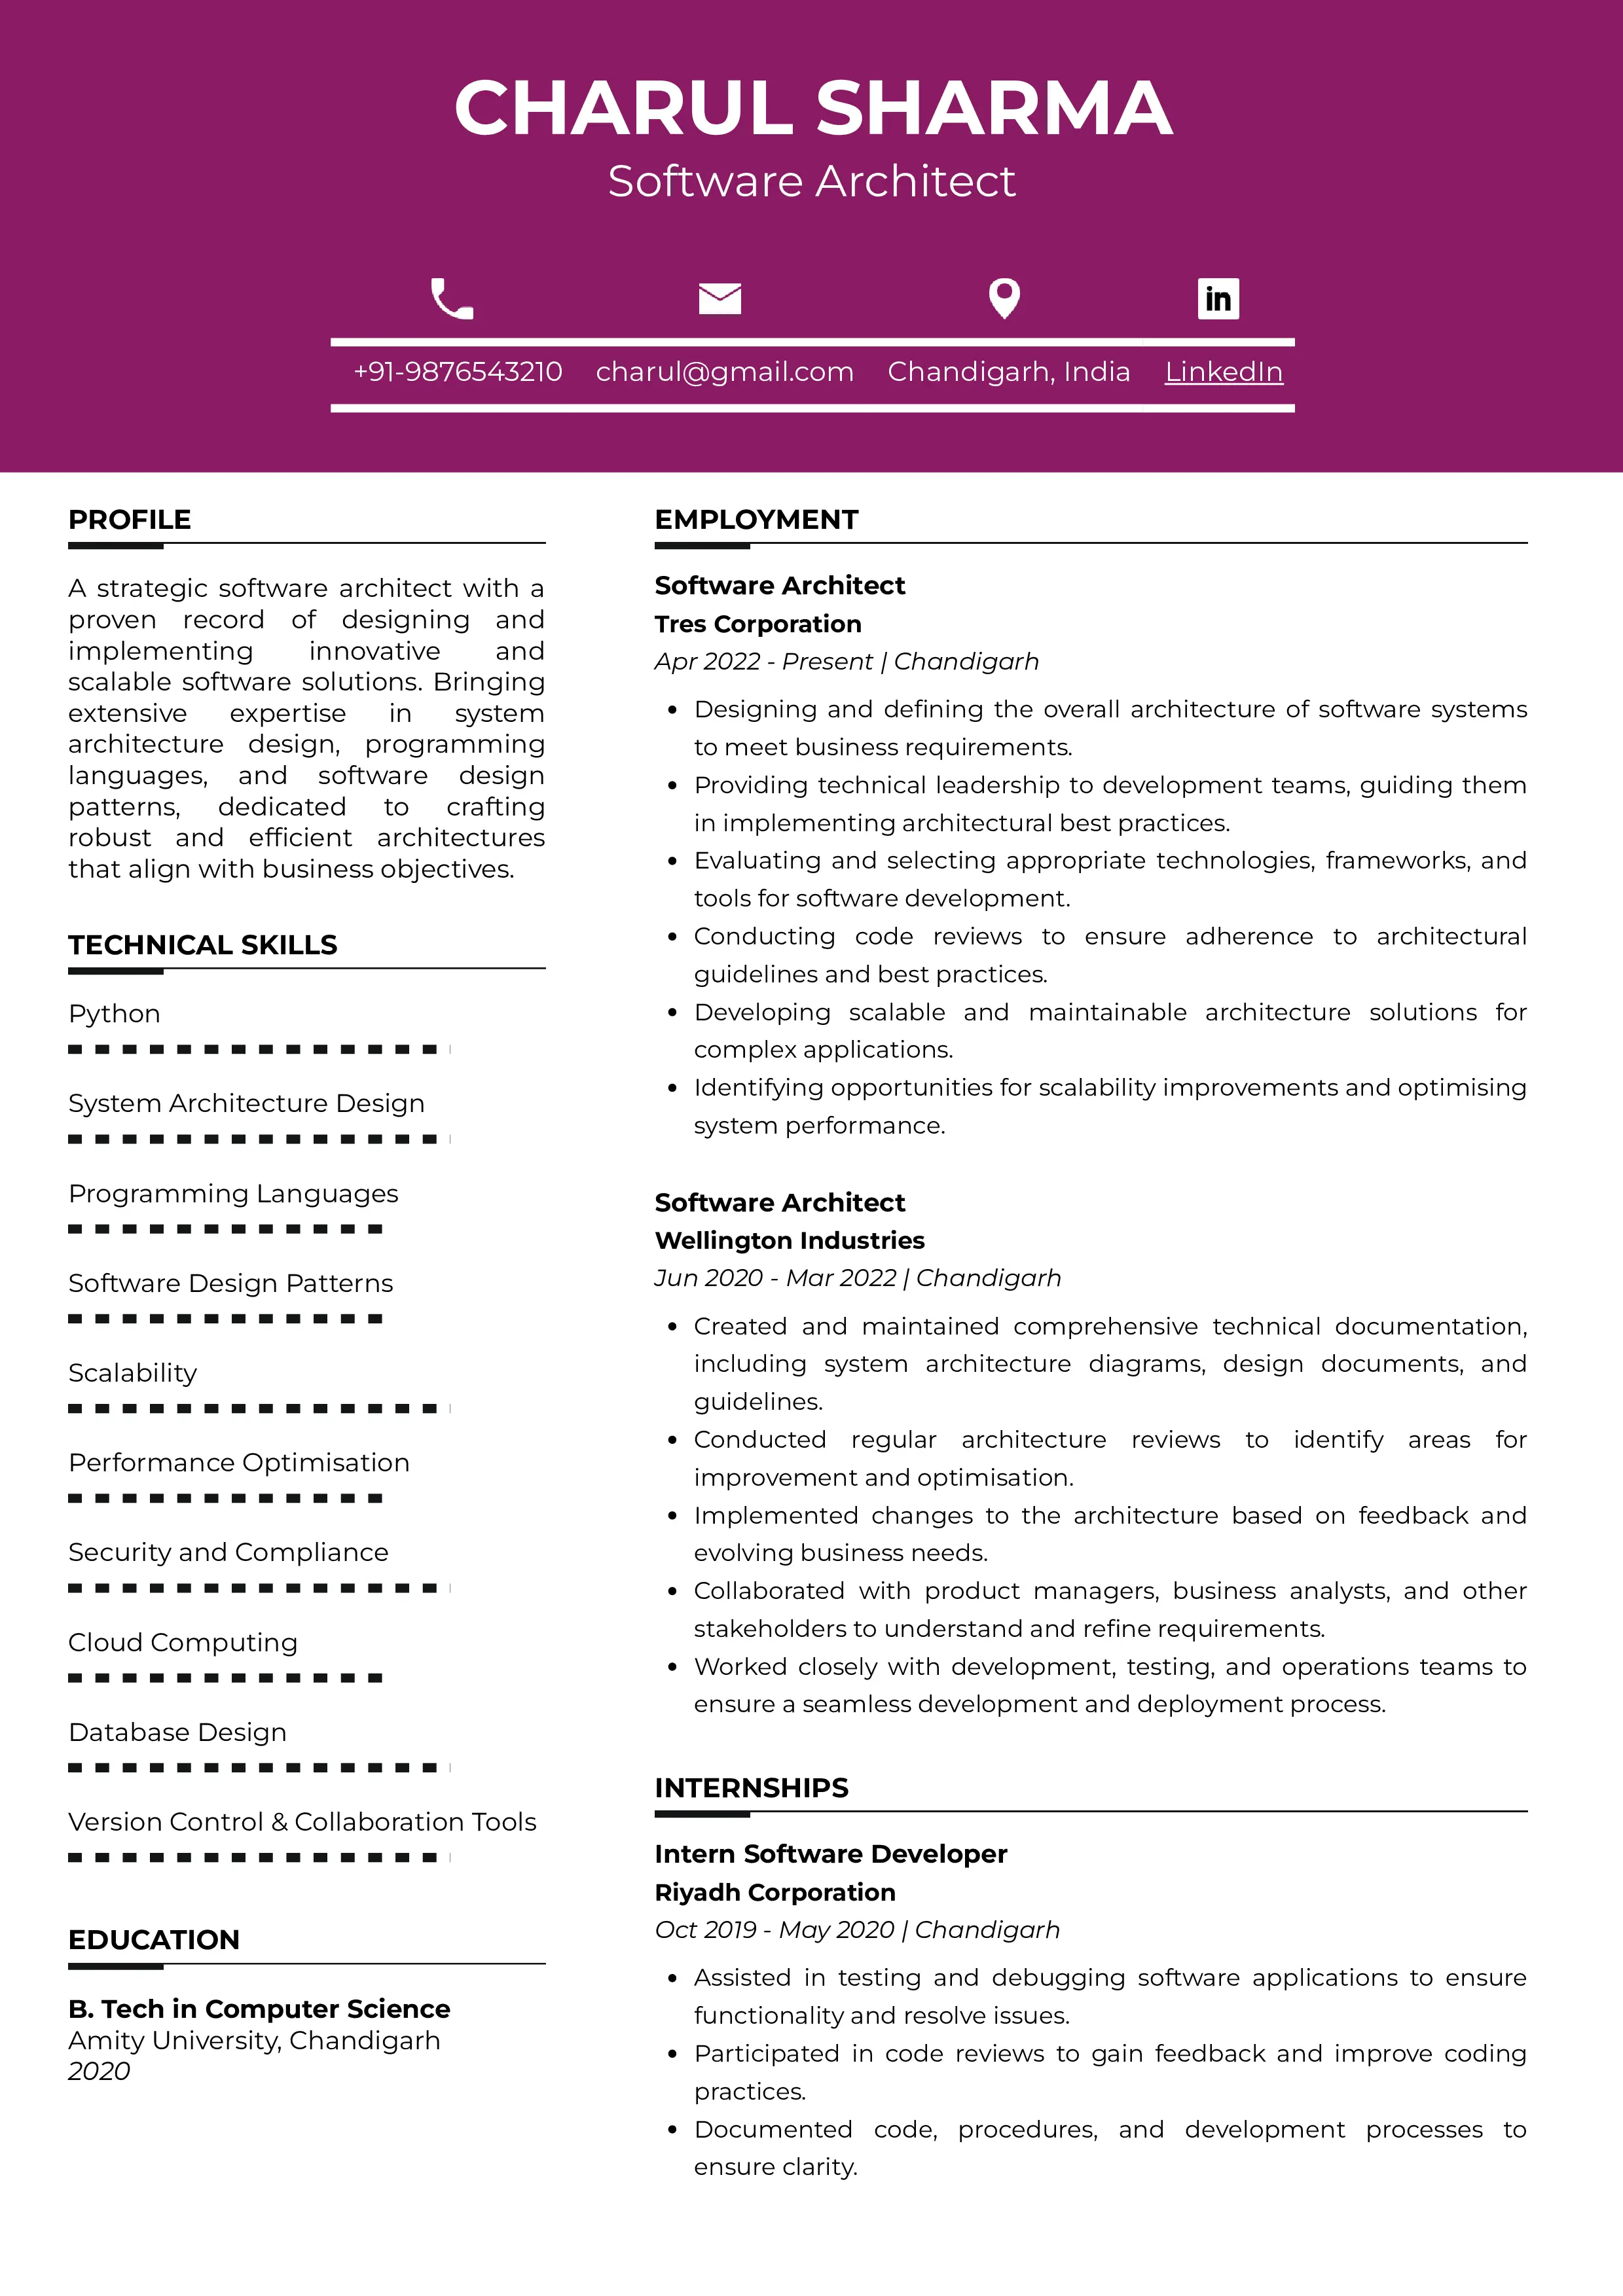 Sample Resume of Software Architect | Free Resume Templates & Samples on Resumod.co